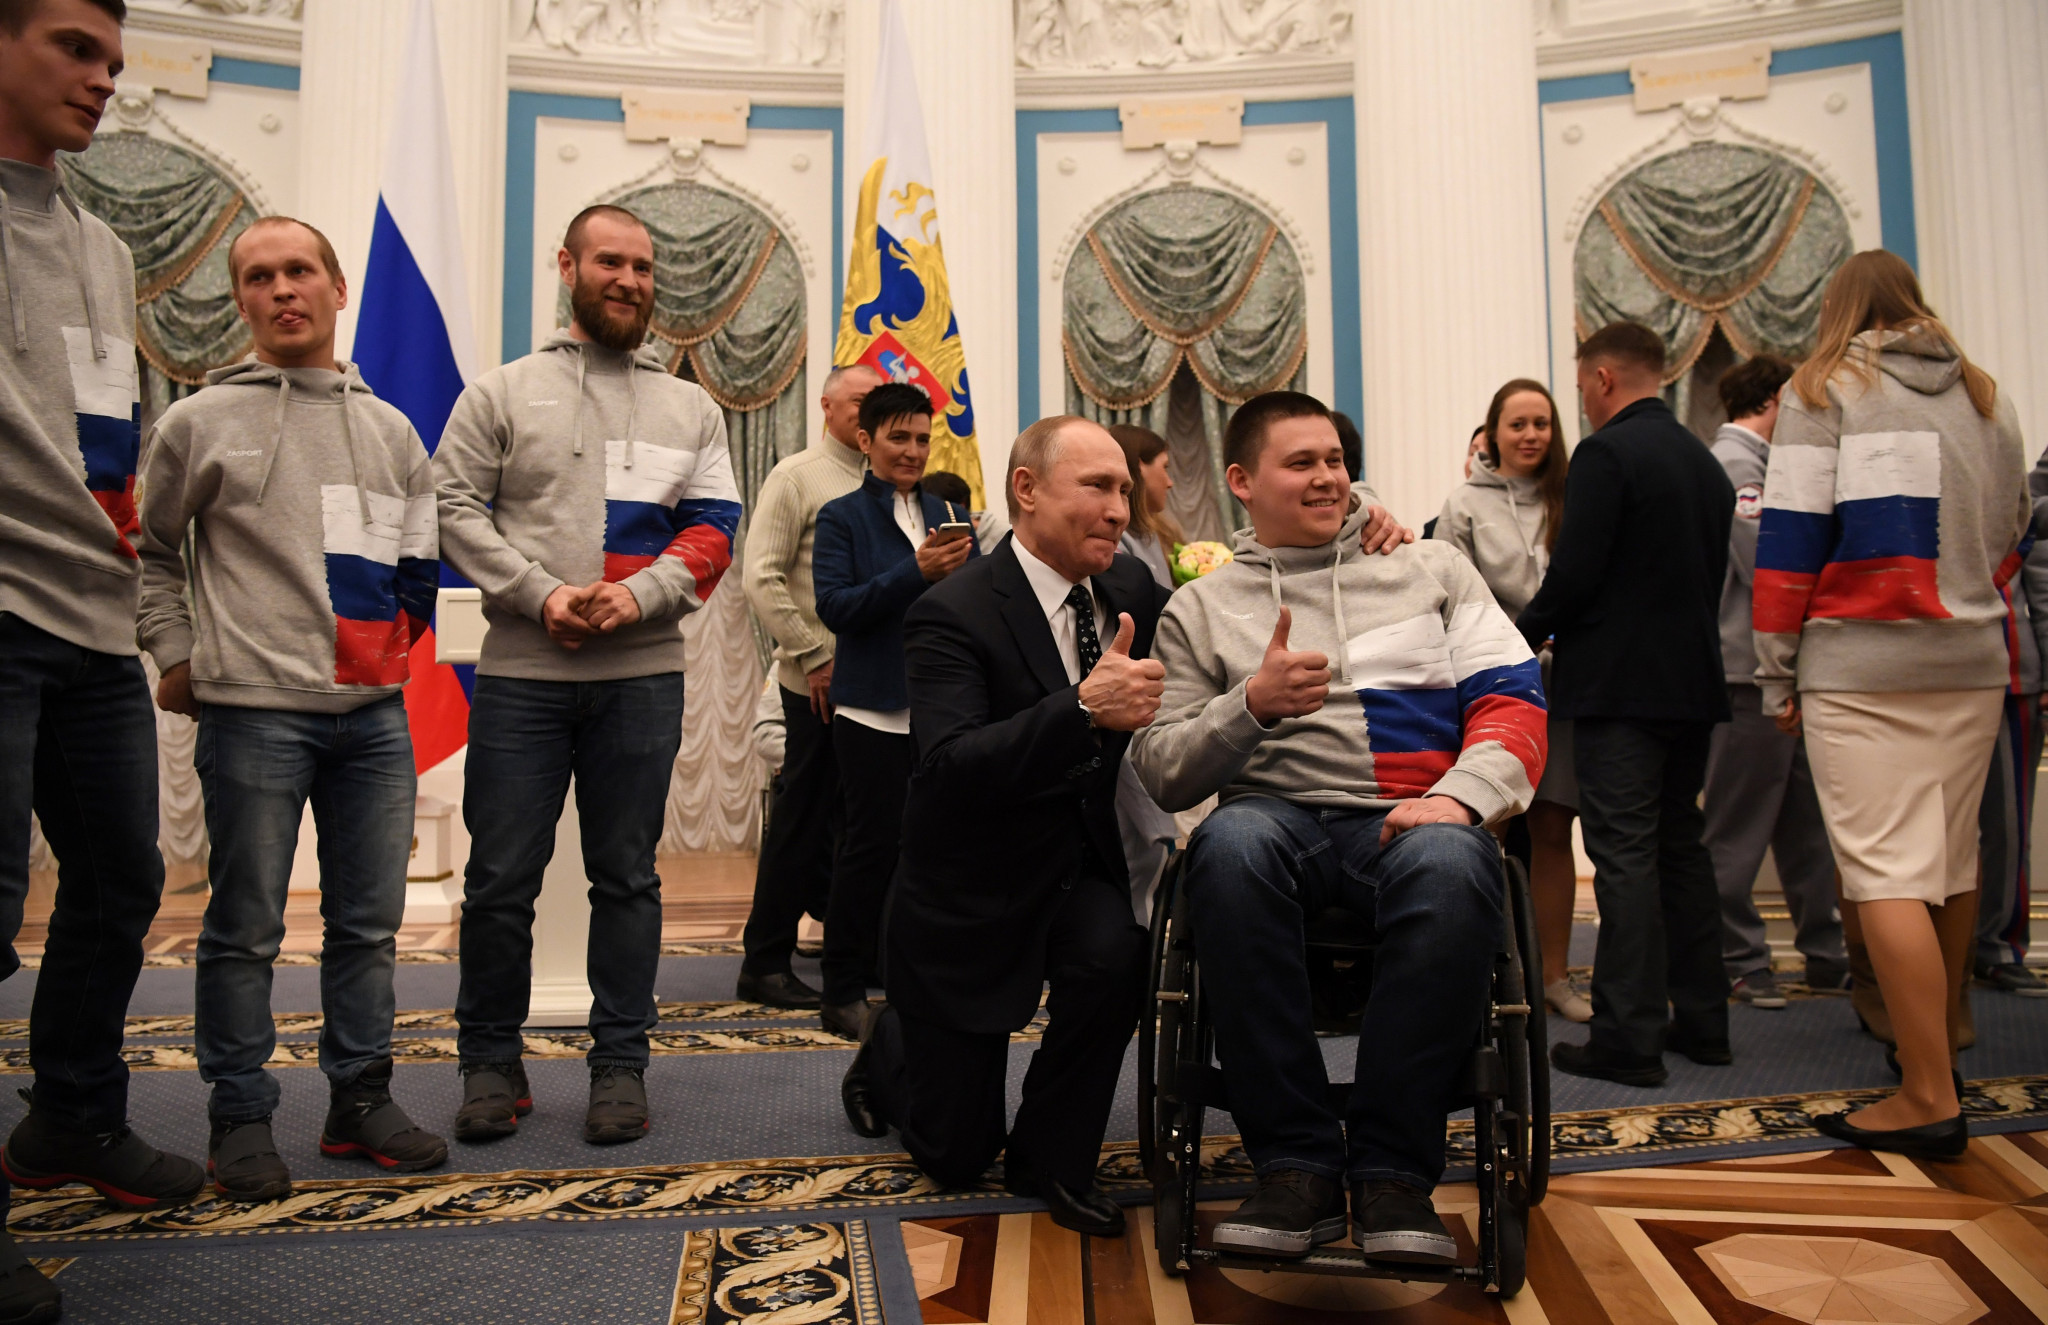 Russian President Vladimir Putin pictured with Russian medal winners from Pyeongchang 2018. Individuals implicated in doping were not allowed to compete there but disciplinary cases have not yet been formally opened and are unlikely to be until reasoned decisions are published ©Getty Images